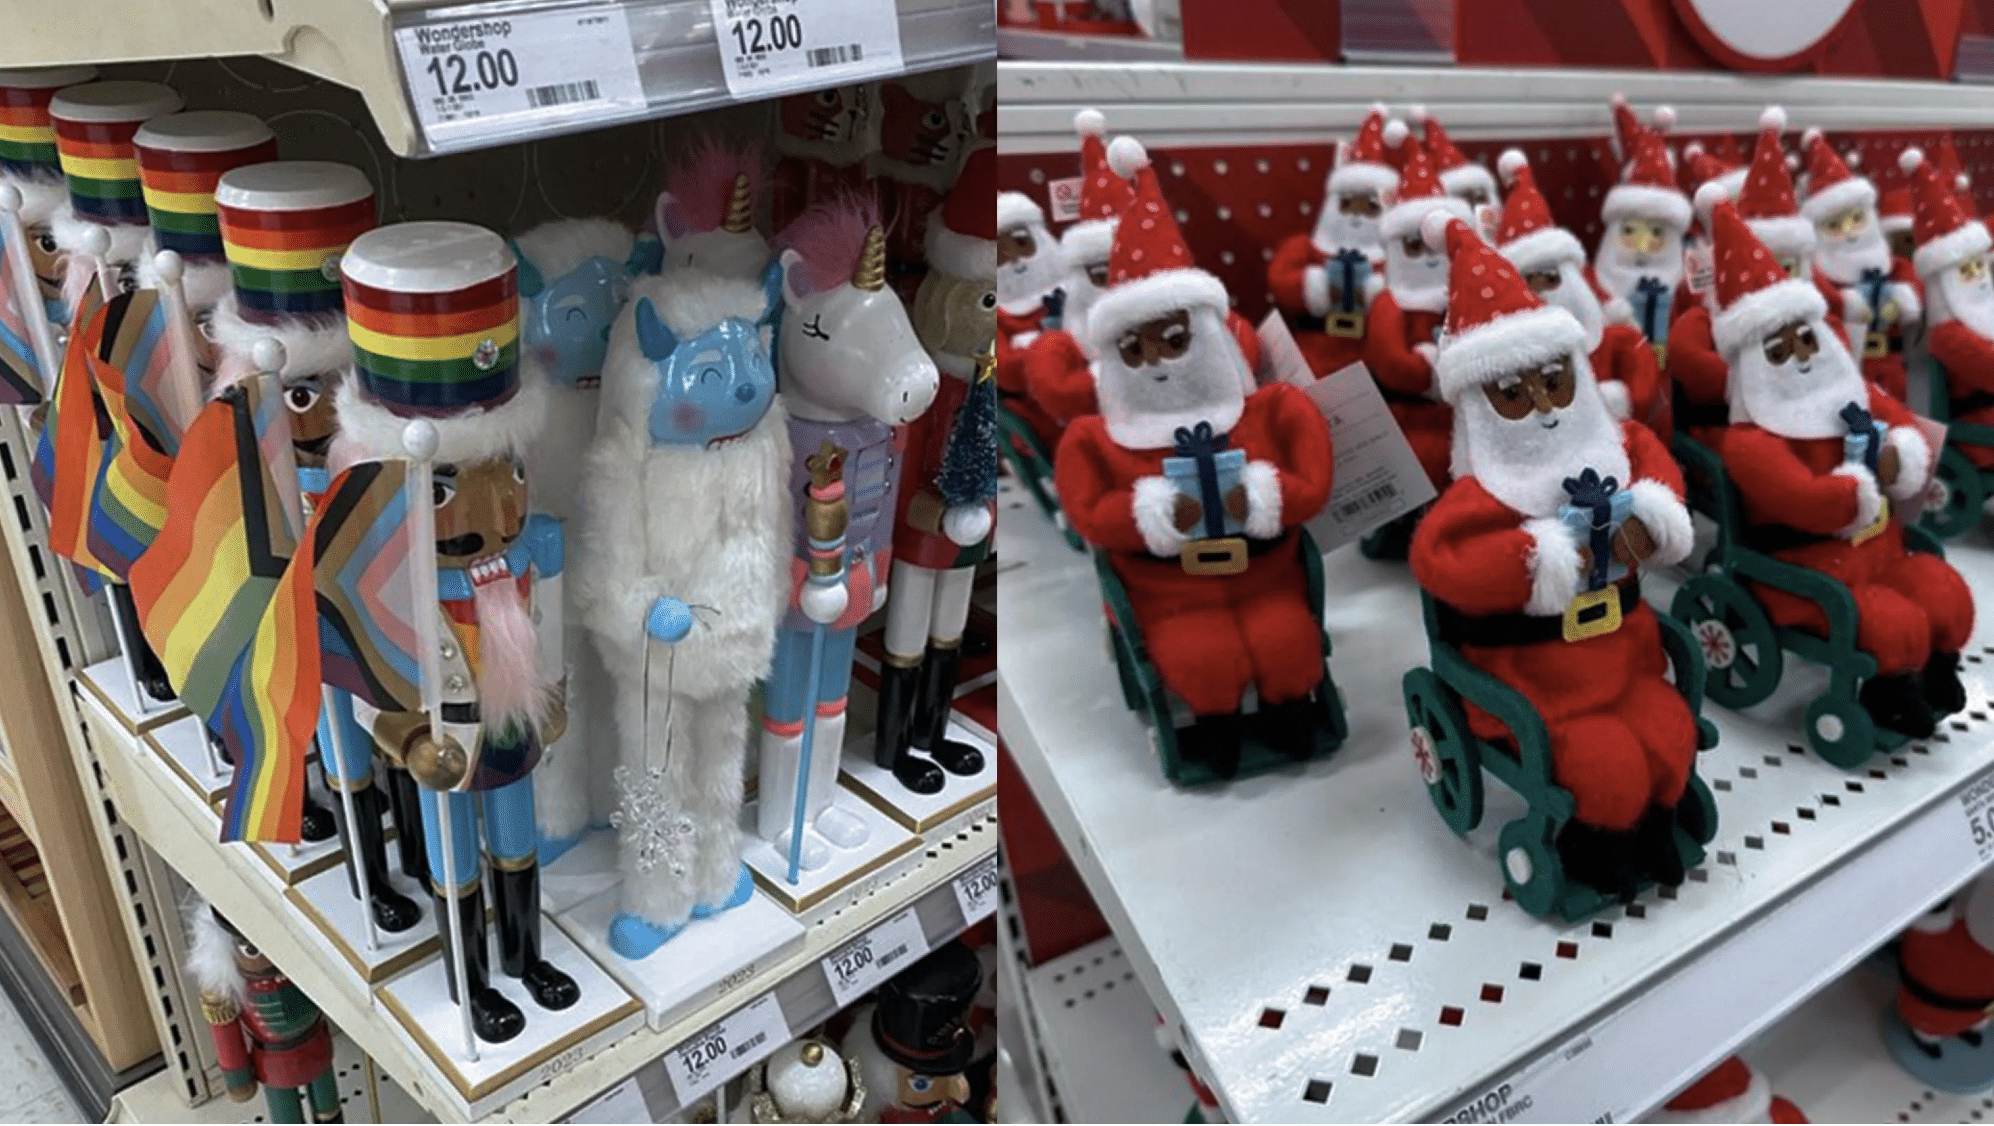 Target once again caters to LGBT agenda in time for Christmas with 